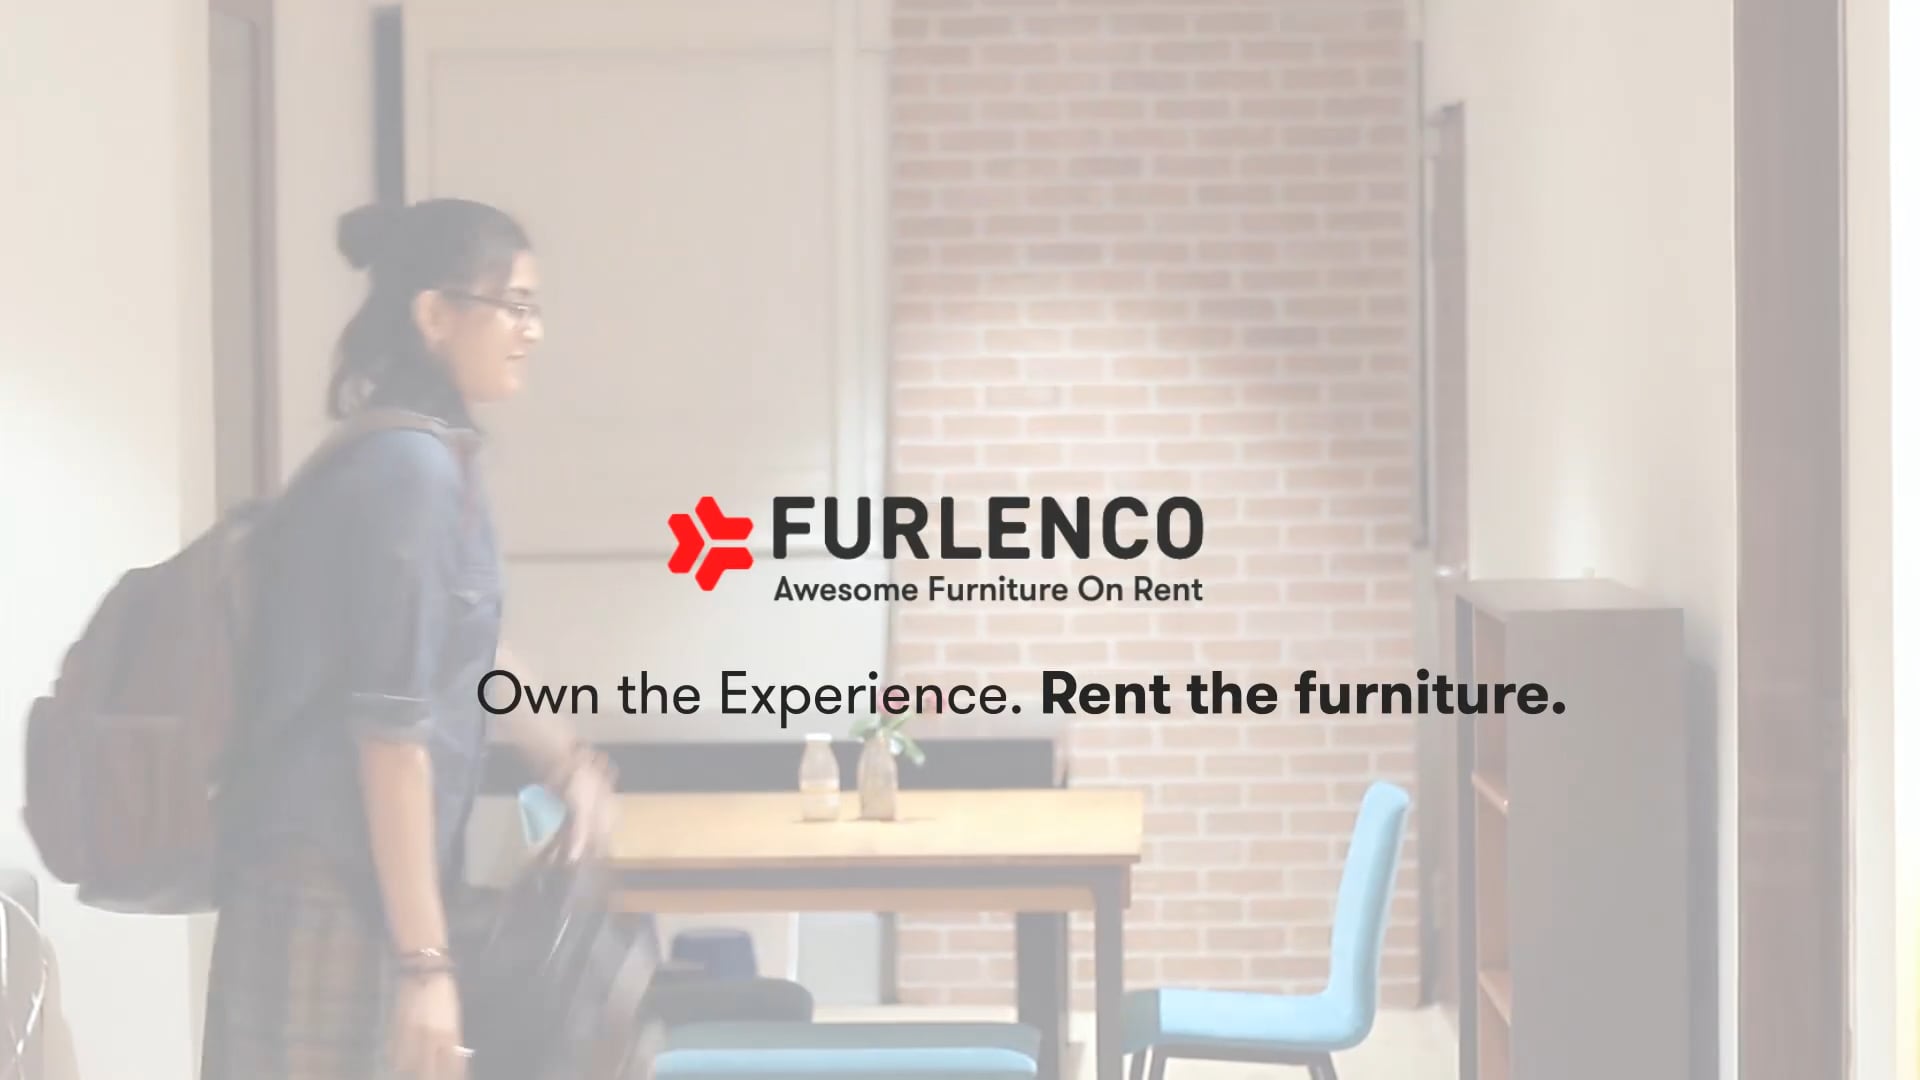 Own the experience, Rent the furniture